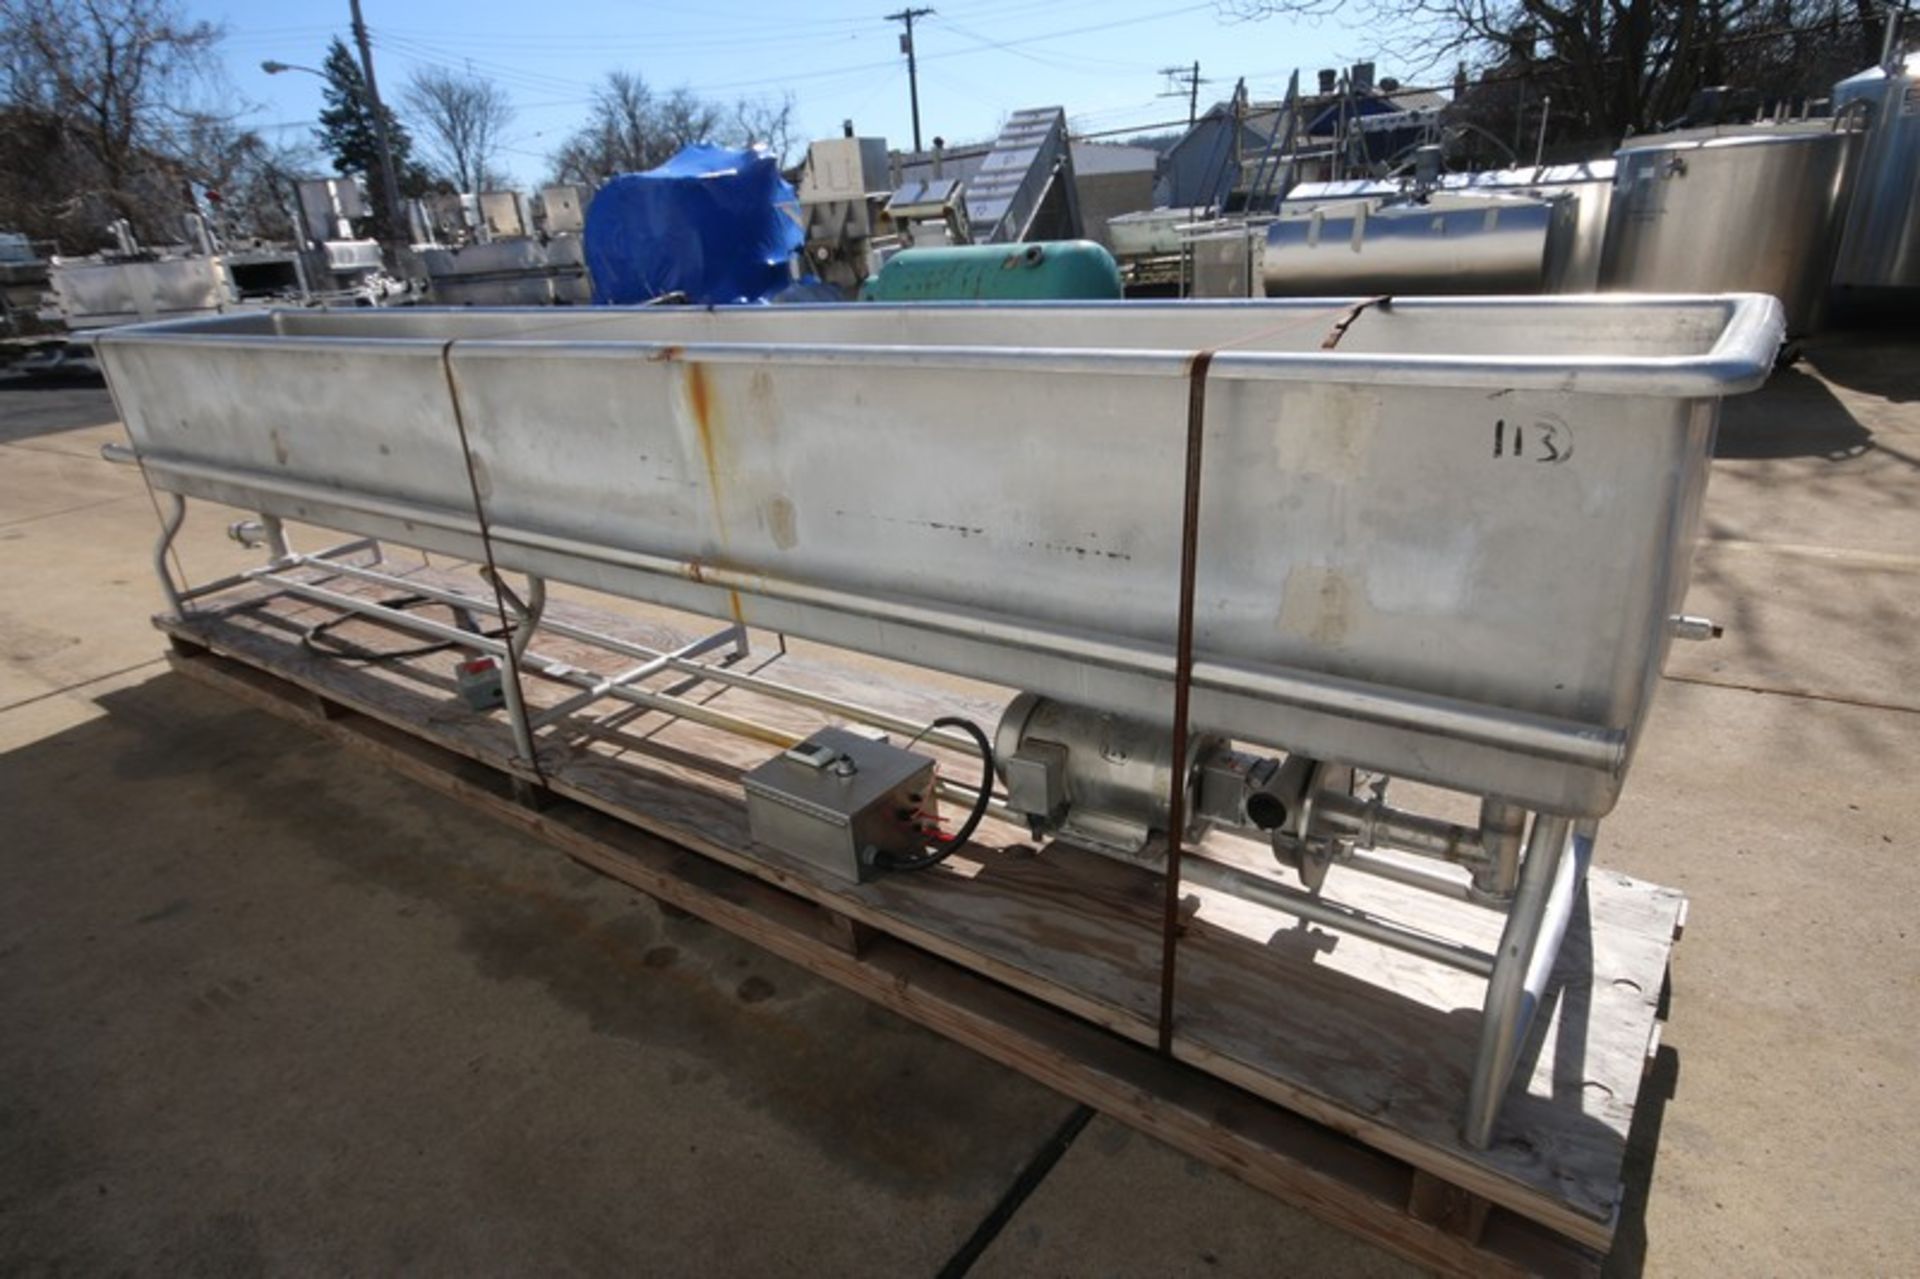 15' 6" L x 25" W x 21" H Jet Spray S/S Wash Trough /COP Tank, with Fristam 3 hp/1760 rpm On-Board - Image 3 of 7